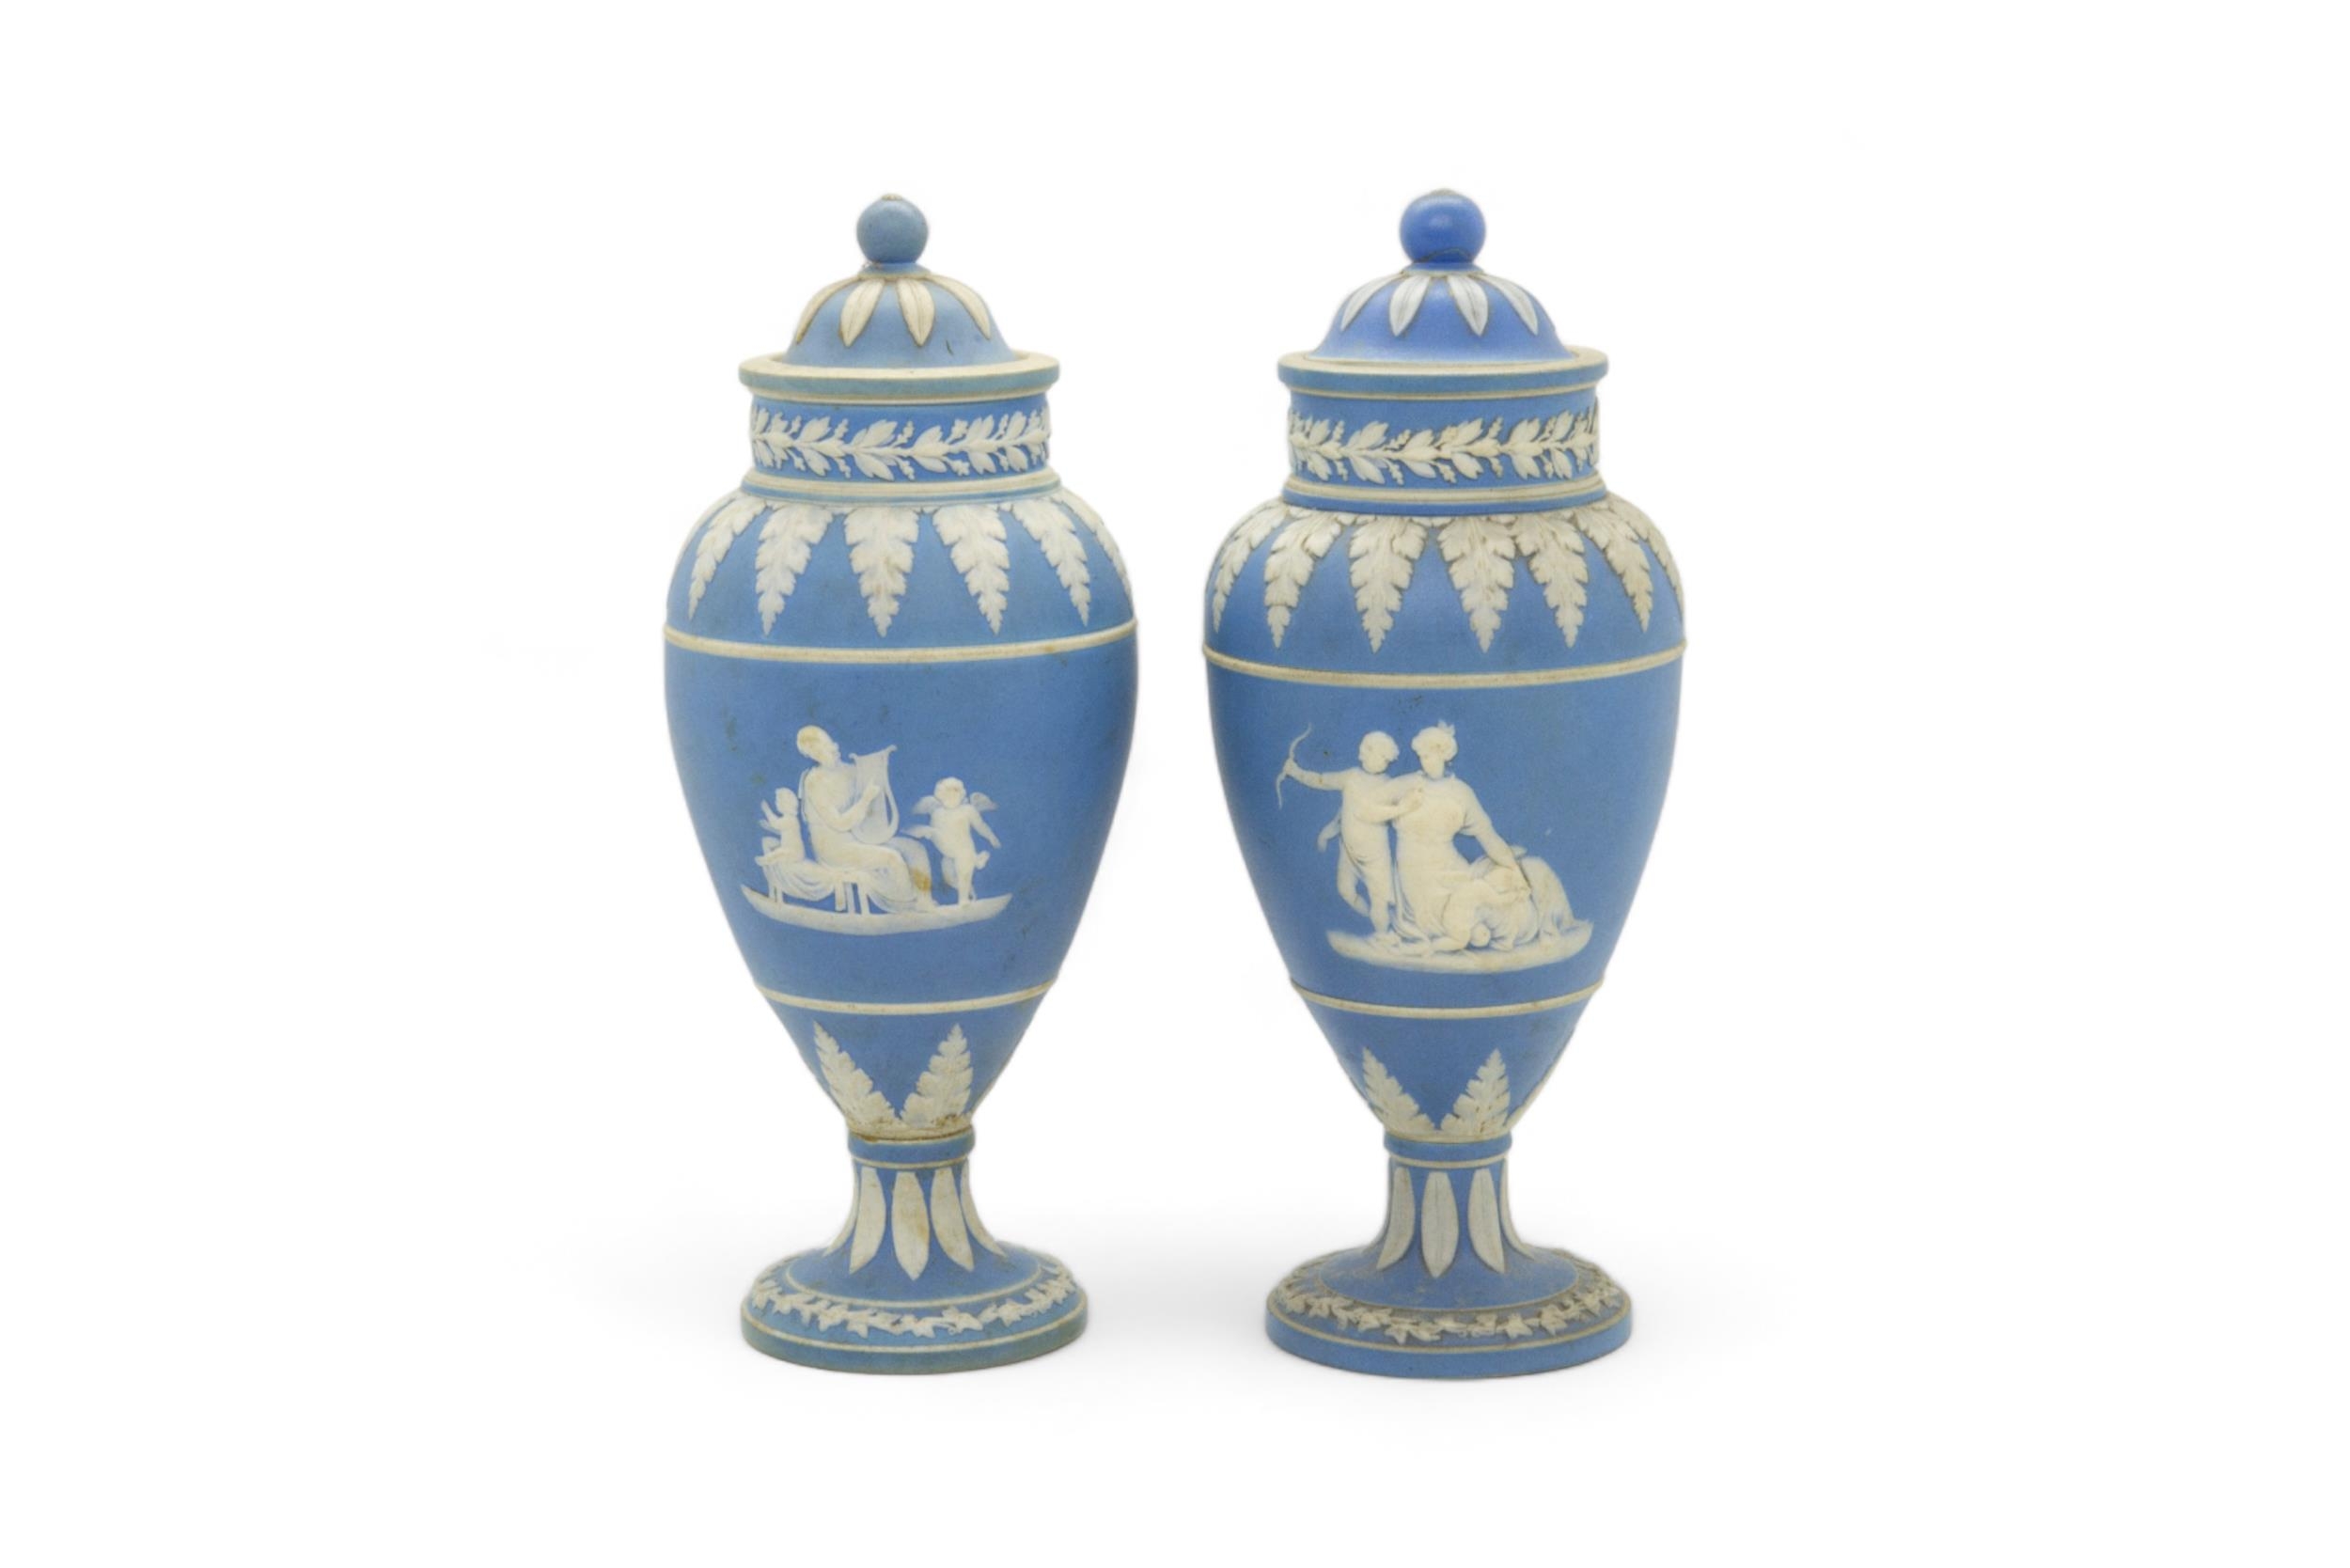 A PAIR OF WEDGWOOD JASPER CASSOLETTE Late 18th century, together with the base of a cassolette and - Image 4 of 6